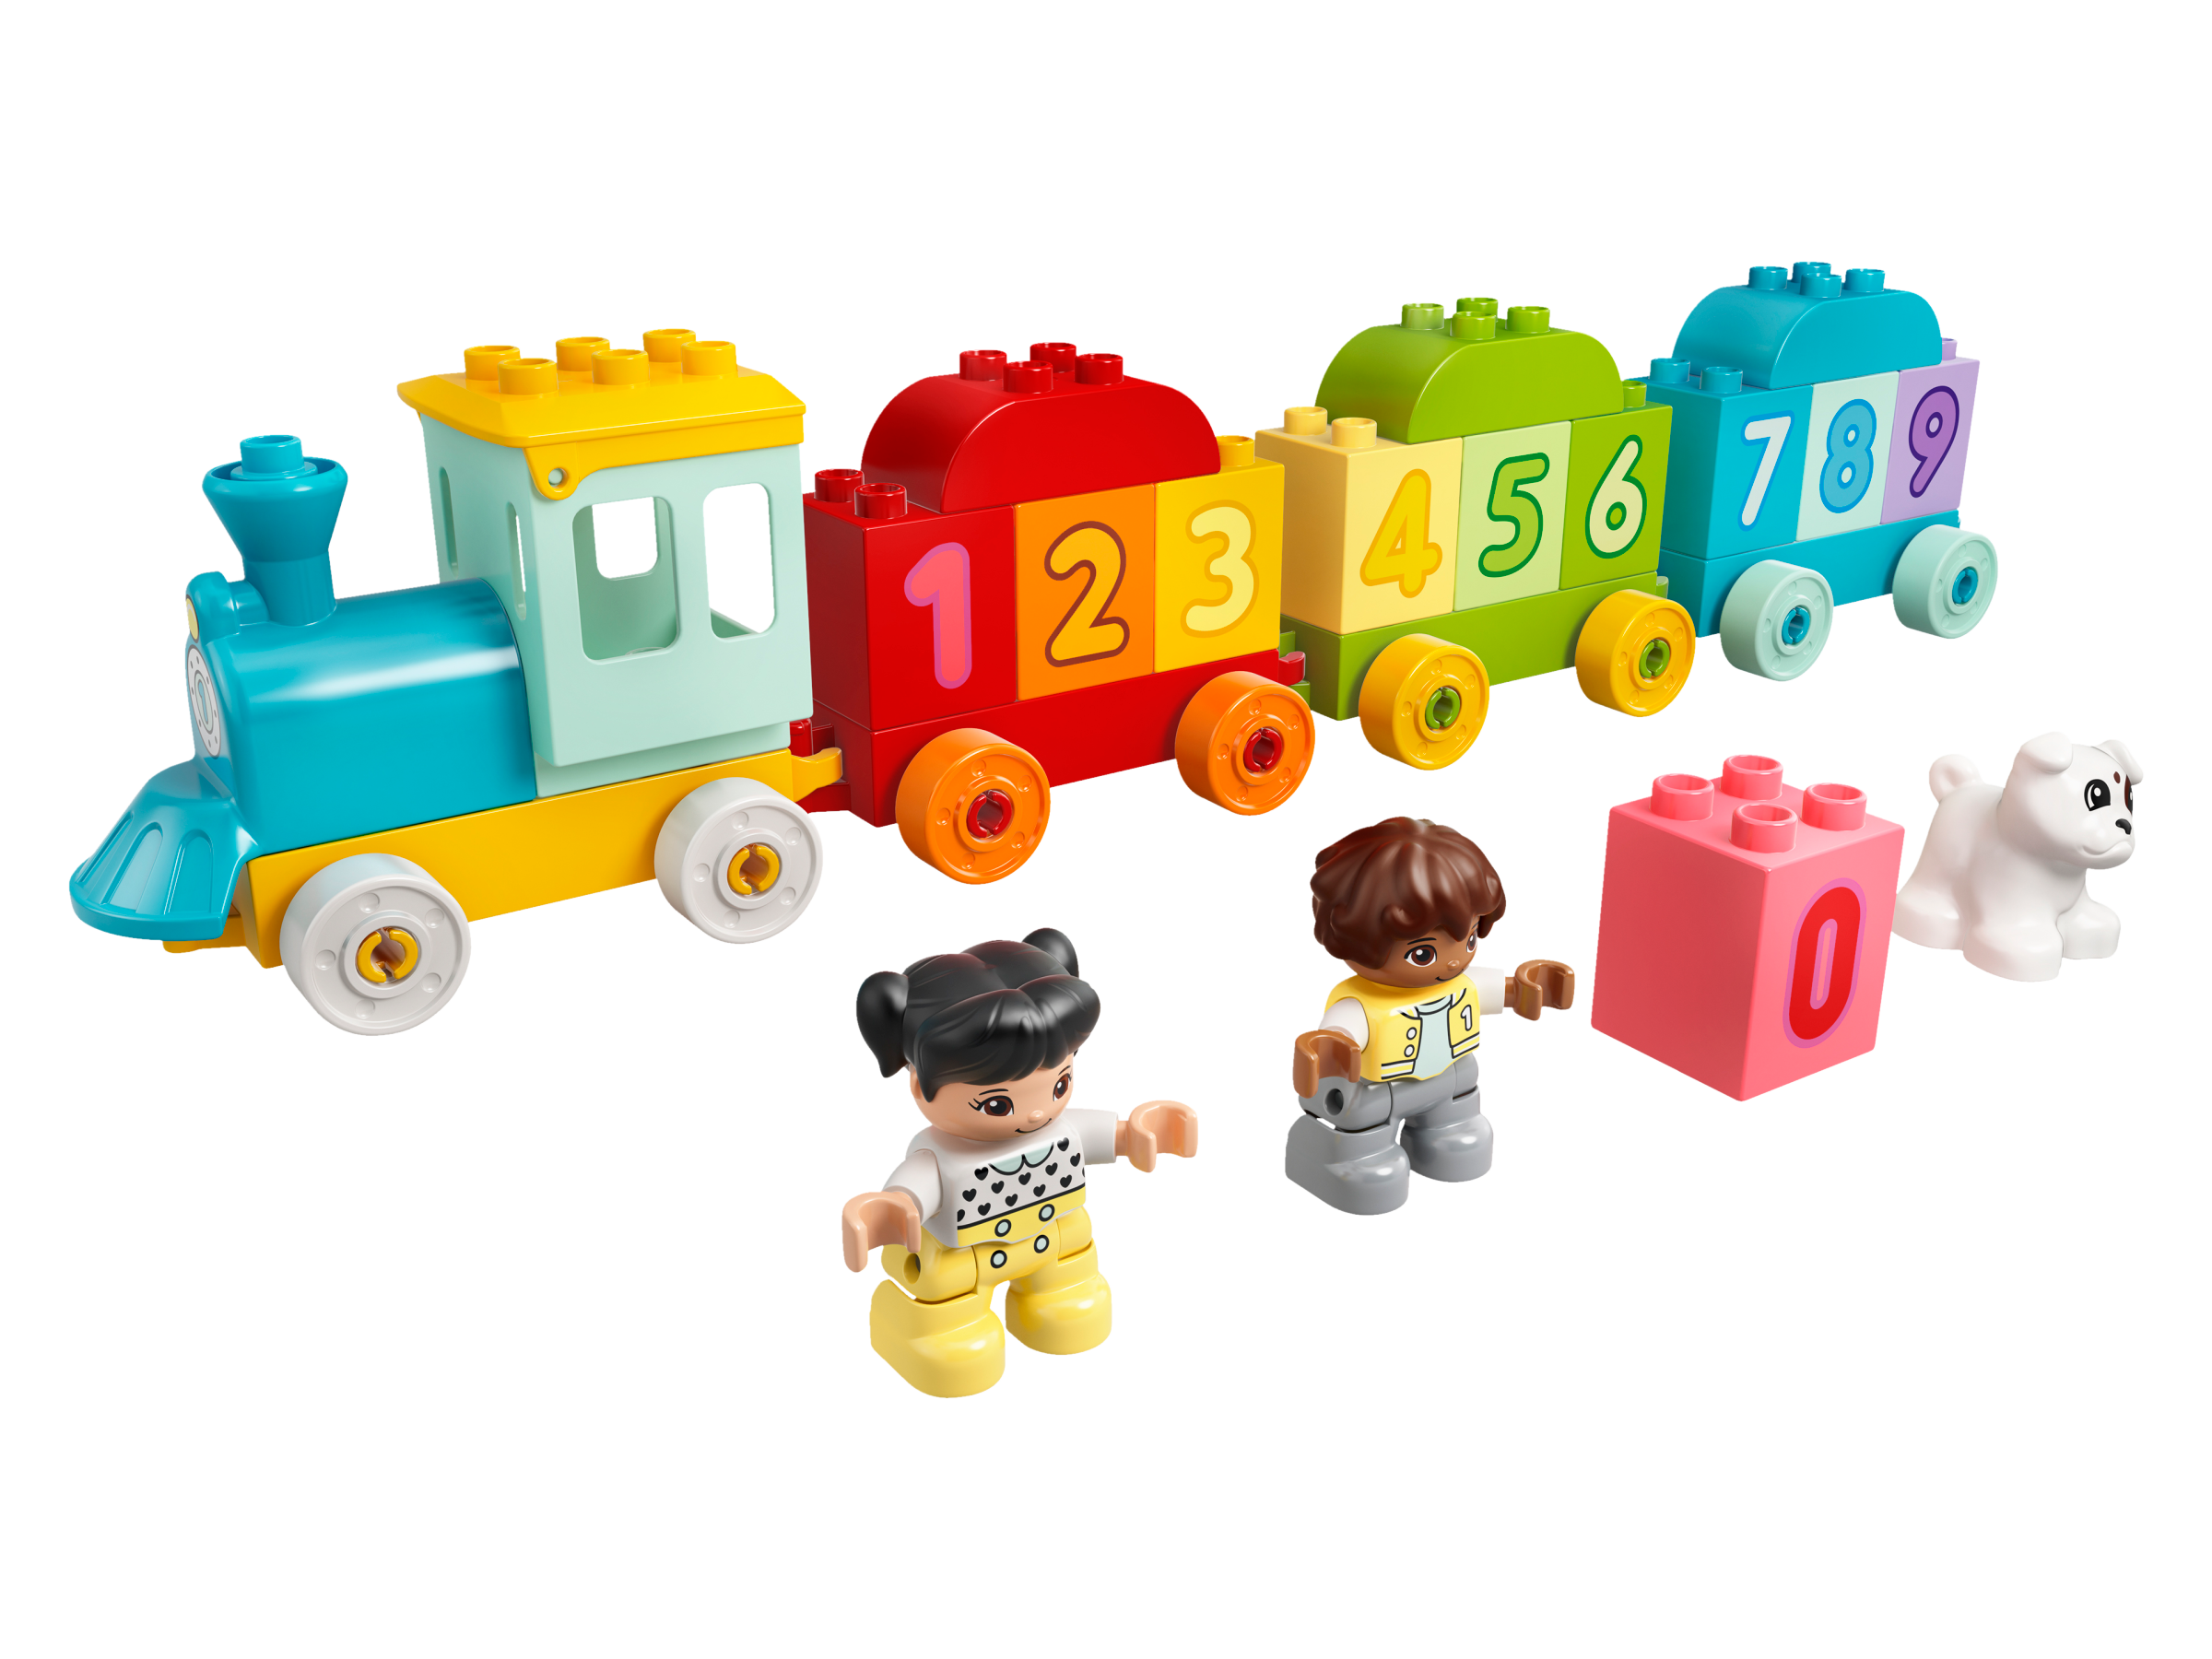 Lego 10954 Number Train - Learn To Count